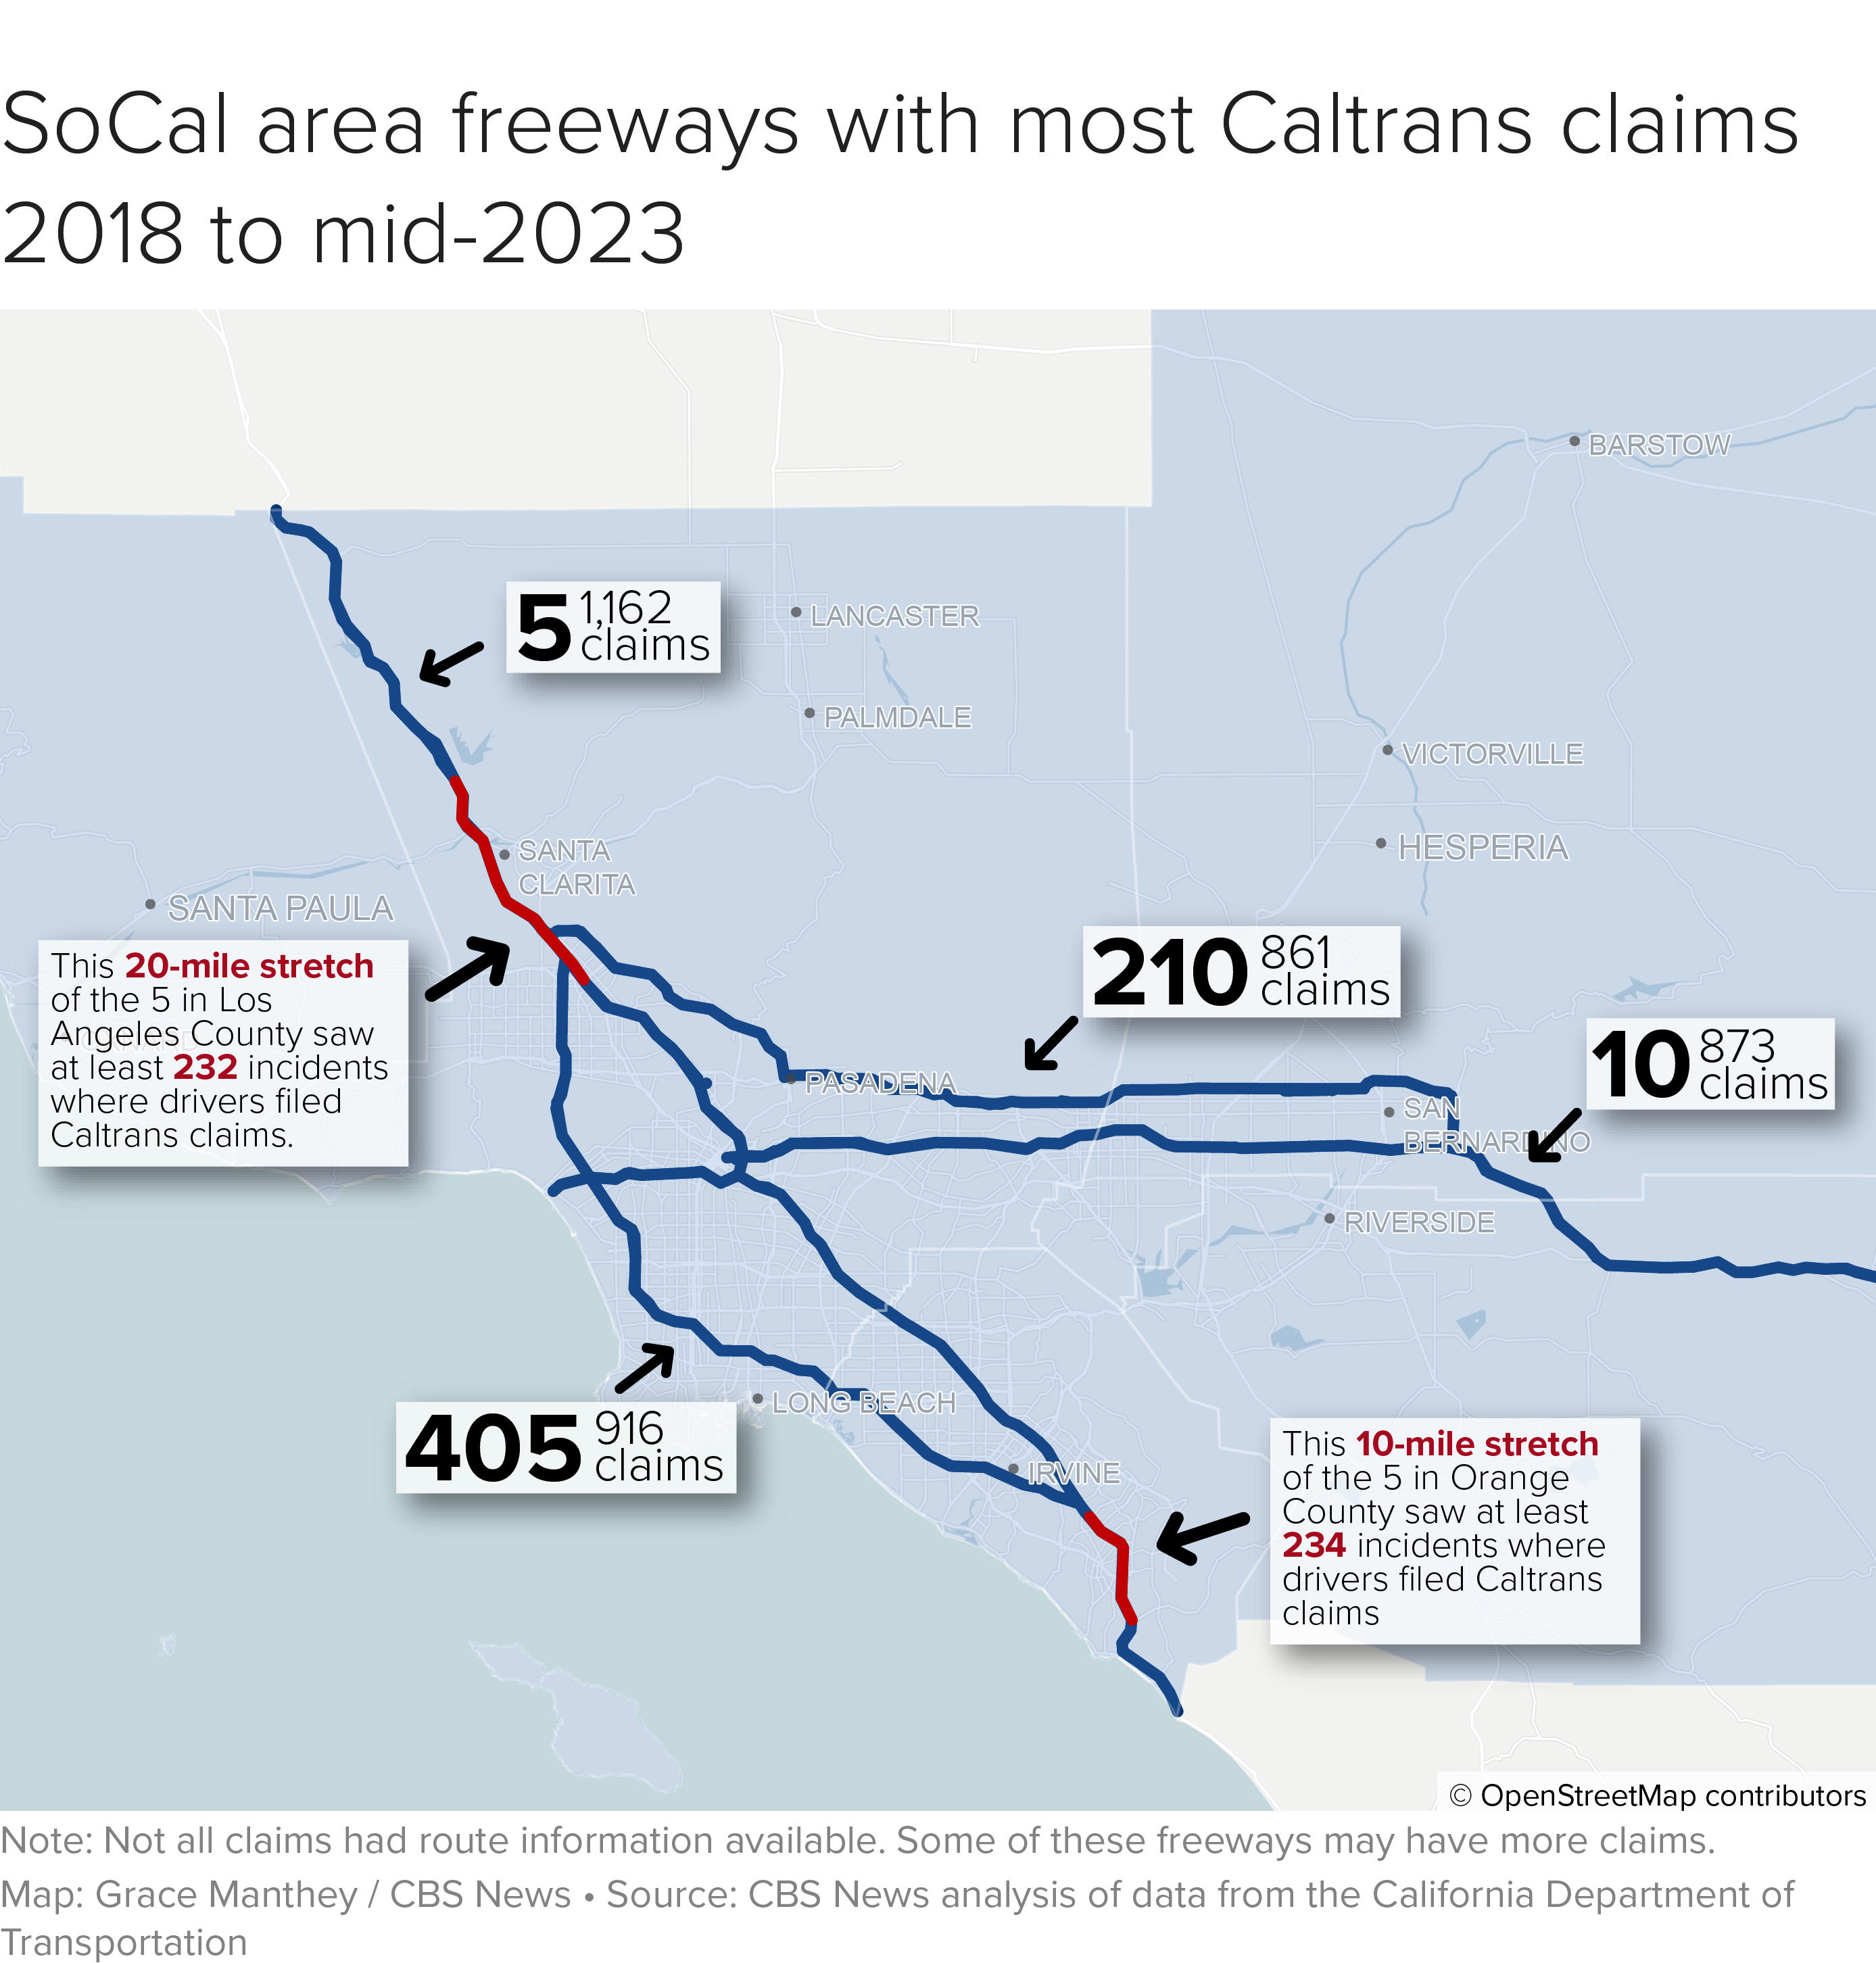 In Southern California, Highway 5 had the most incidents, resulting in problem area claims in Orange County between Laguna Hills and San Juan Capistrano and from San Fernando through Santa Clarita to Castaic.  There were also many claims on the 405, the 10 and the 210. 